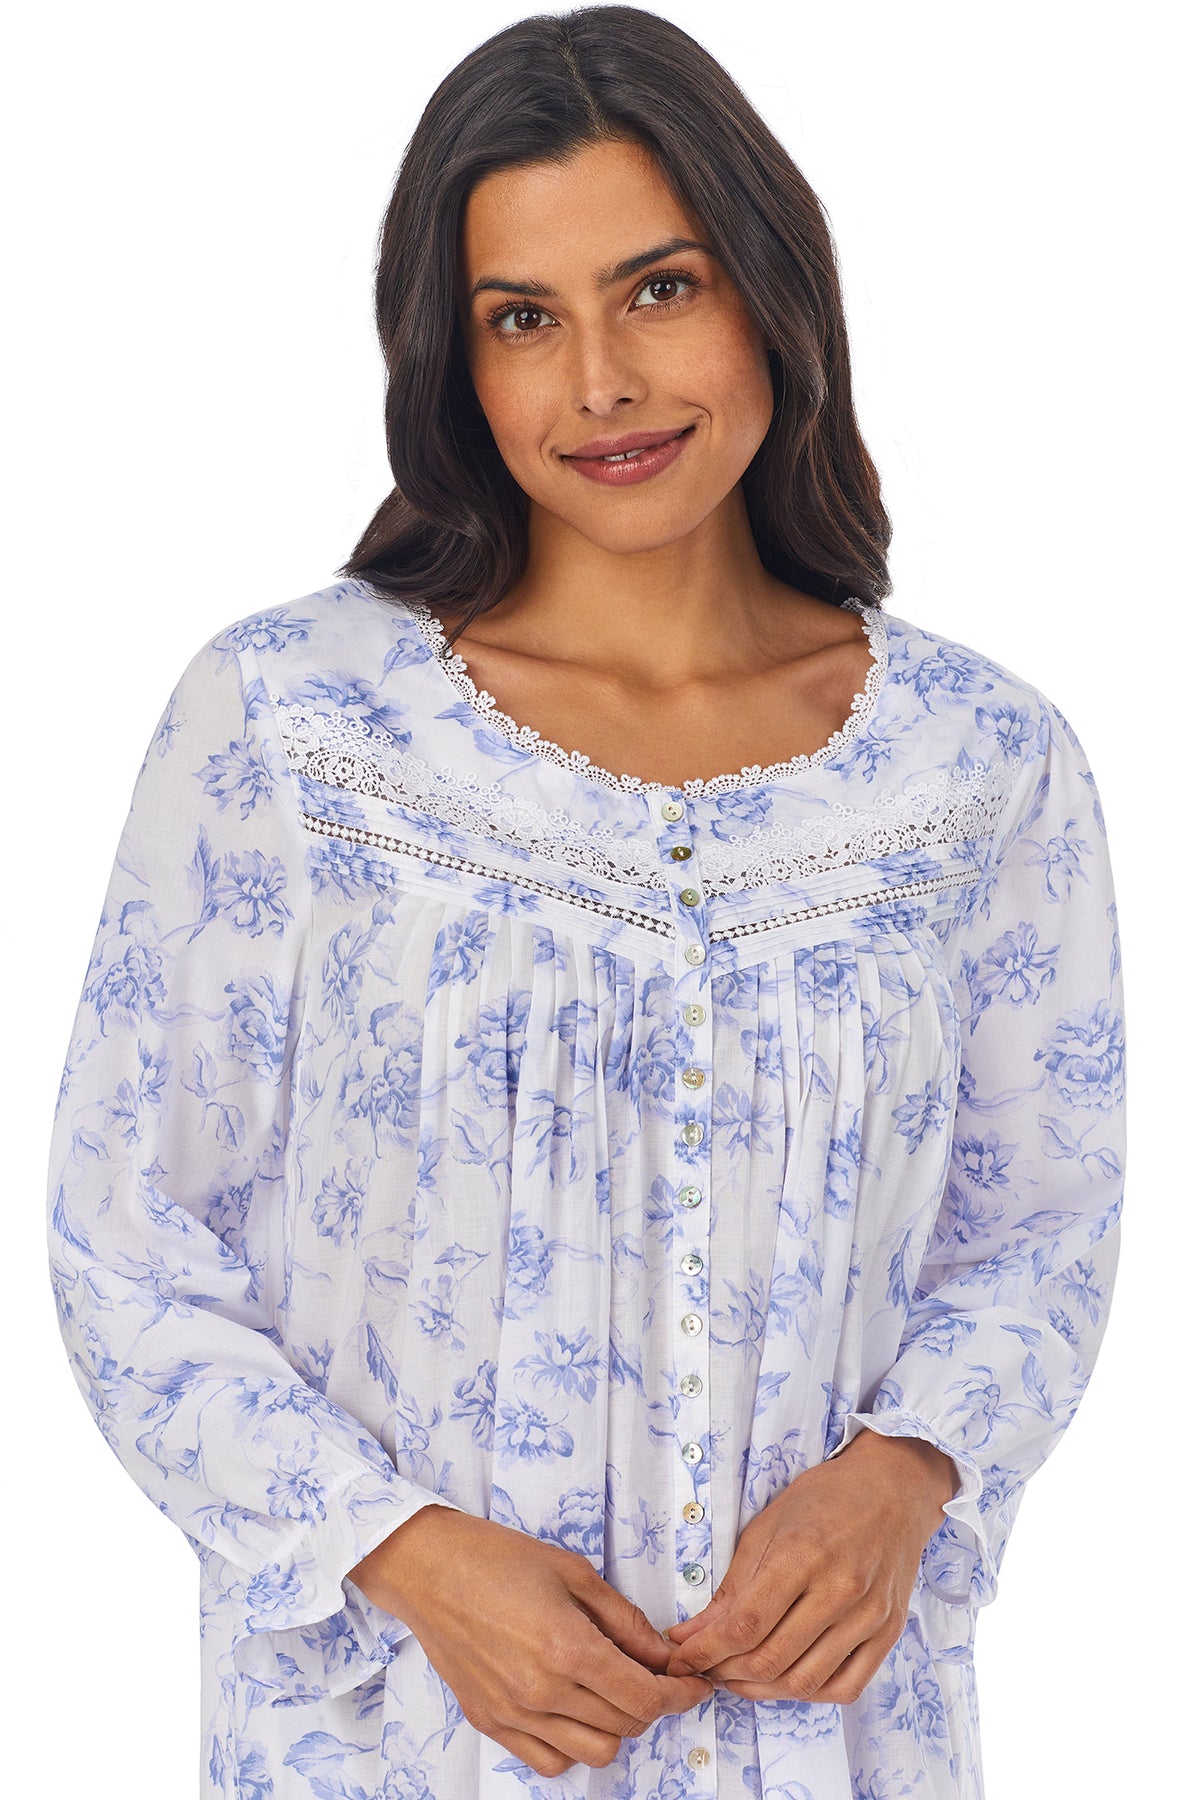 Upper part of a lady wearing a white long sleeve button front robe with blue floral pattern.